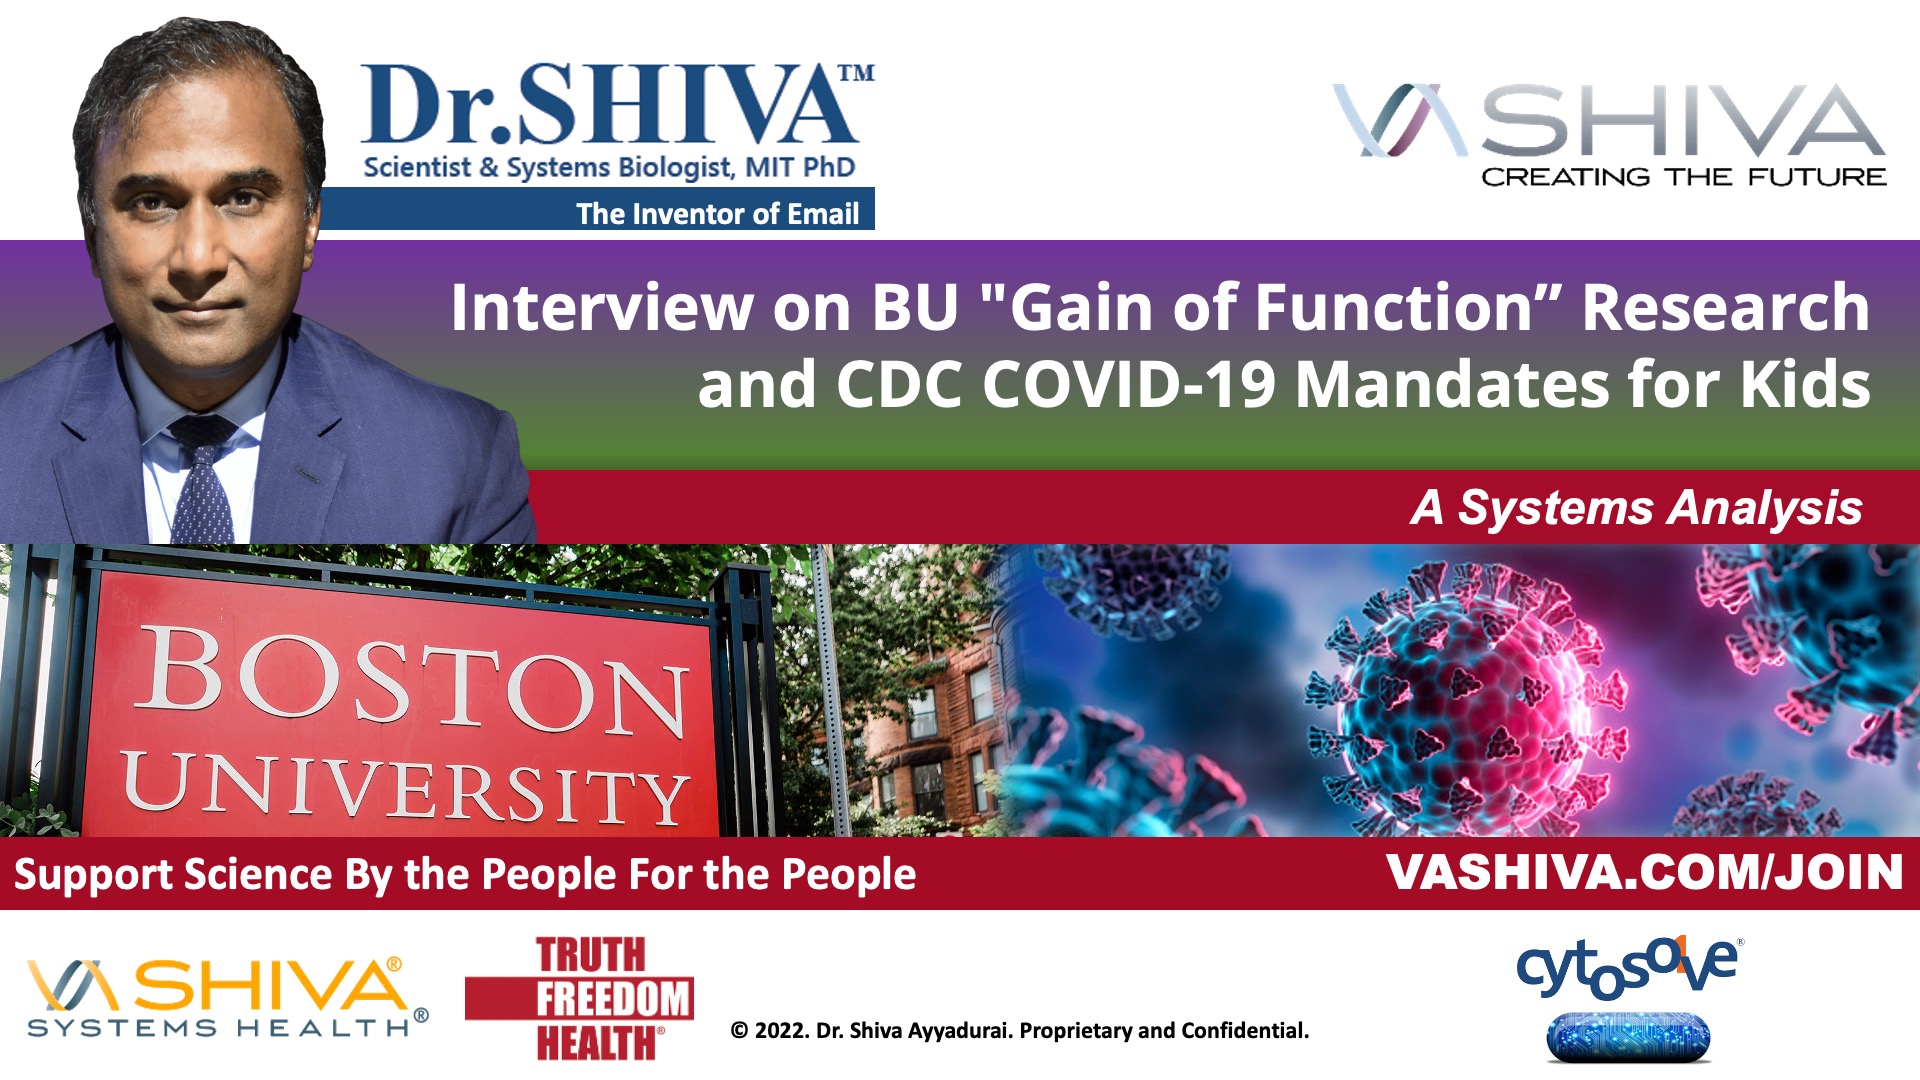 Dr.SHIVA LIVE: Interview on BU Gain of Function Research and CDC COVID-19 Mandates for Kids.